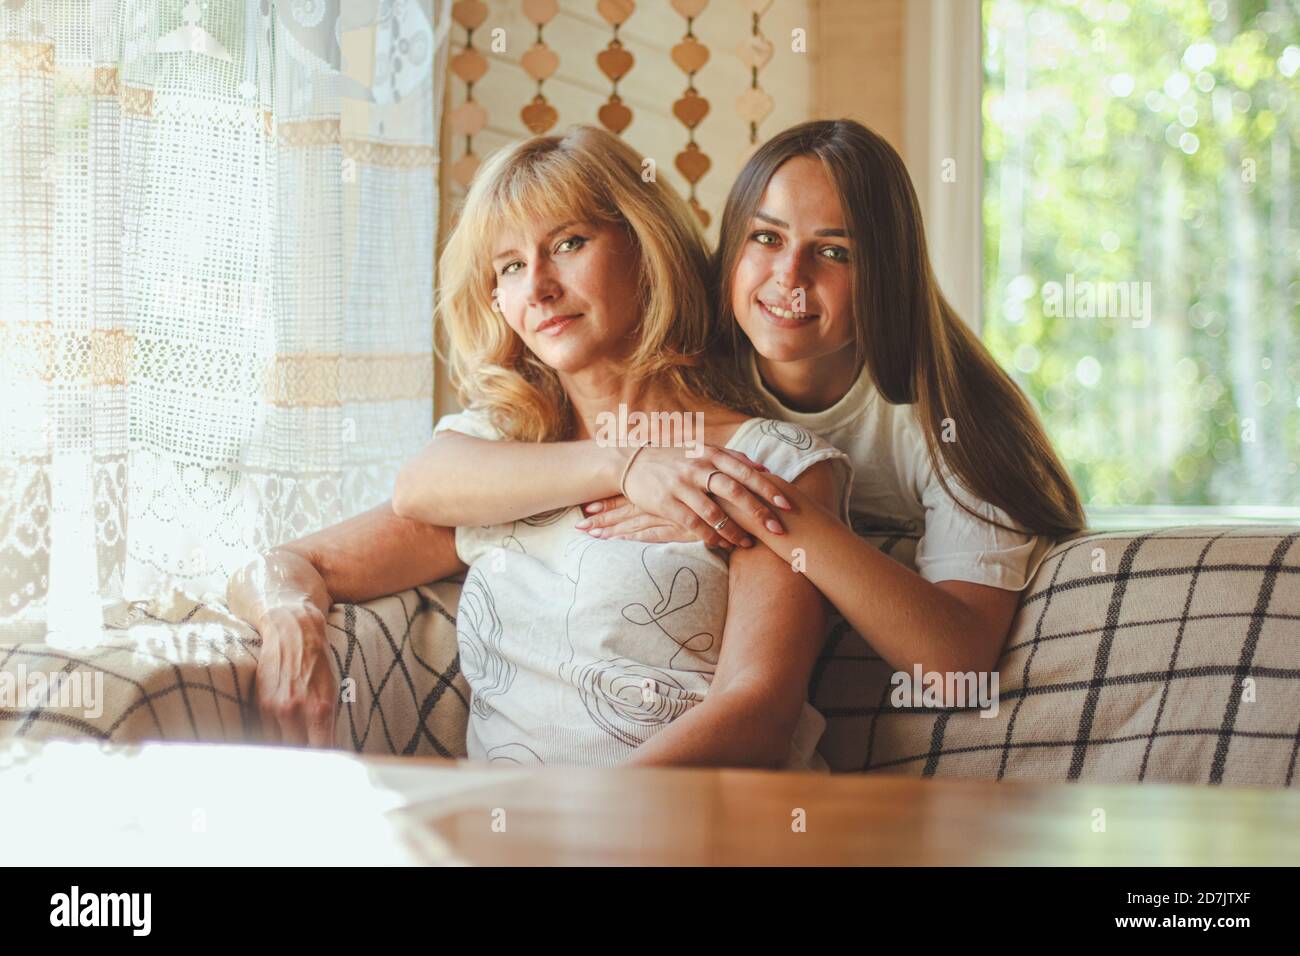 Loving adult 20s daughter hug elderly mother from behind while mom sitting on couch people posing looking at camera smiling feels happy, concept of mu Stock Photo